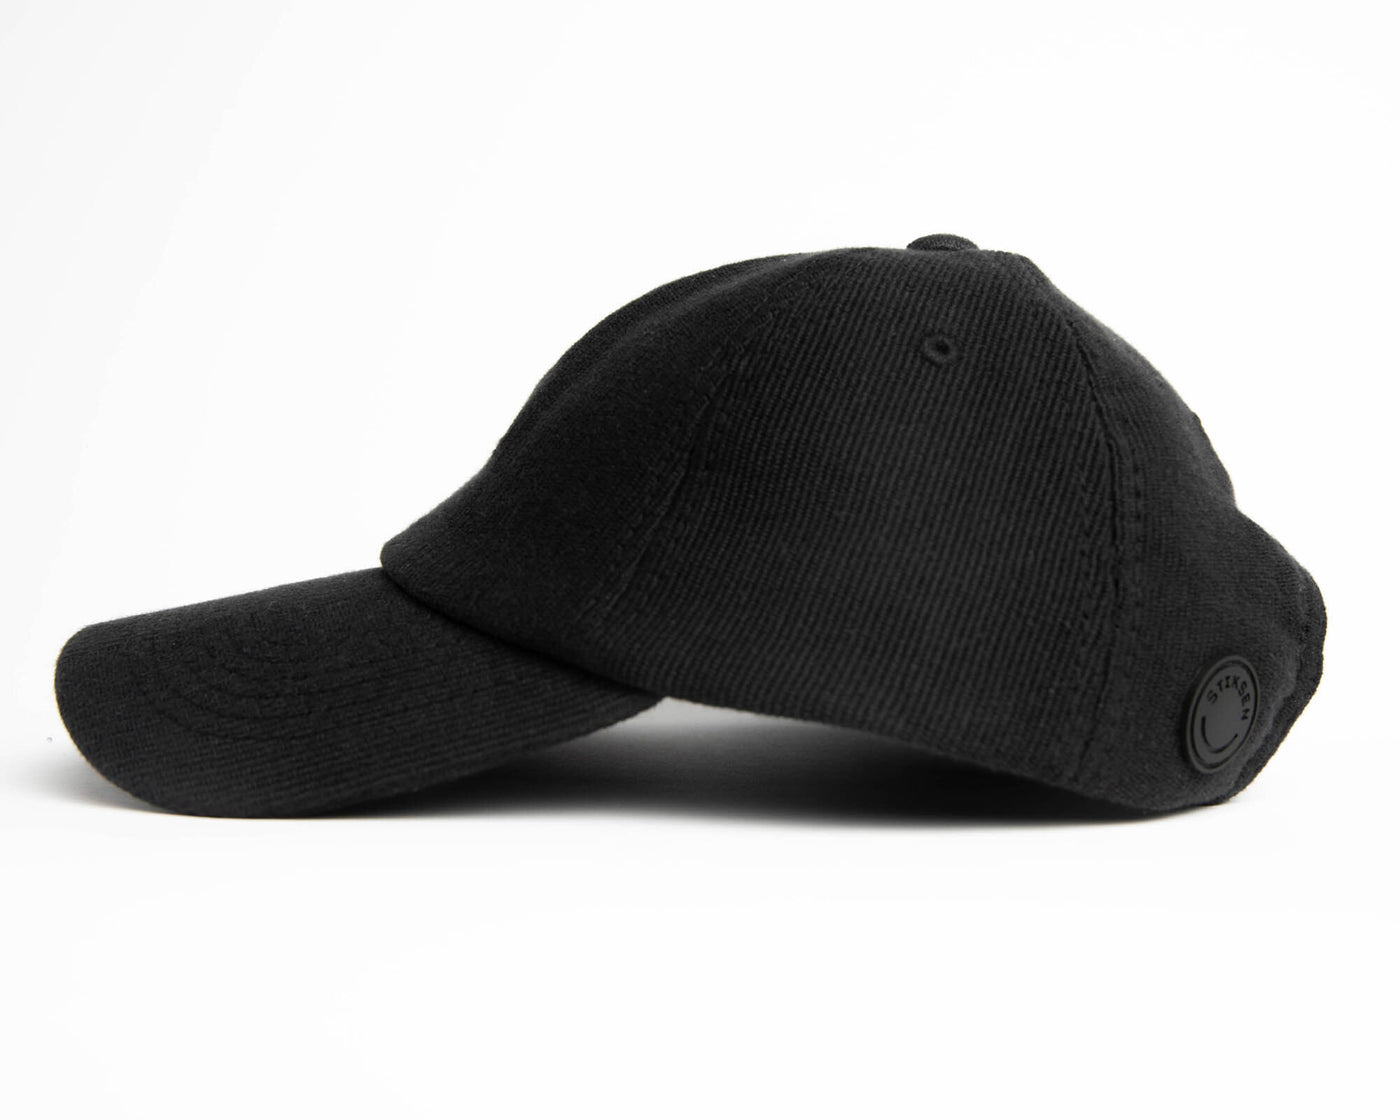 A black ninja cap from the NIP X Stiksen merch collaboration, featuring the Ninjas in Pyjamas logo subtly embroidered on the front. This stylish and adjustable cap is perfect for showcasing your support for NIP in a sleek and trendy way.